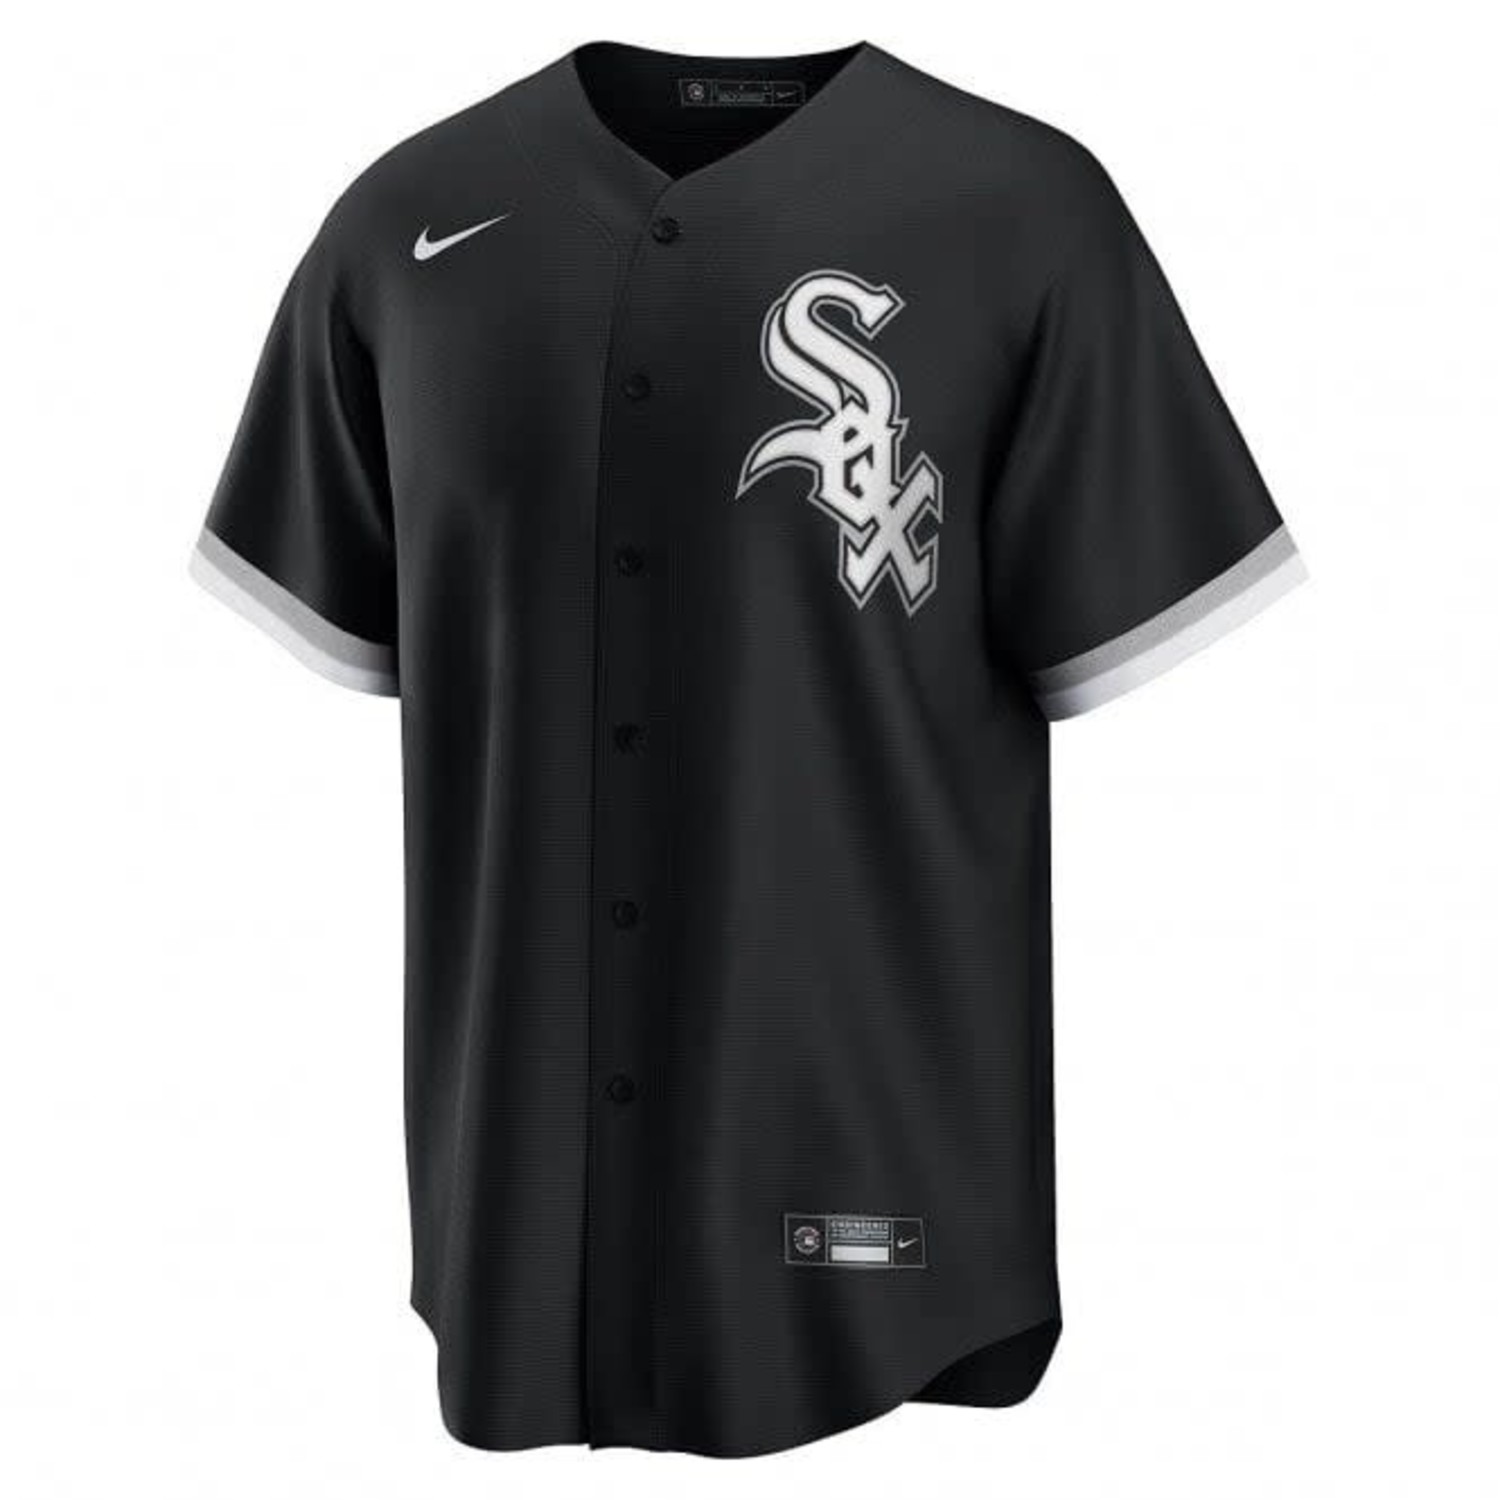 Chicago White Sox Nike Official Replica Road Jersey - Mens with Robert 88  printing